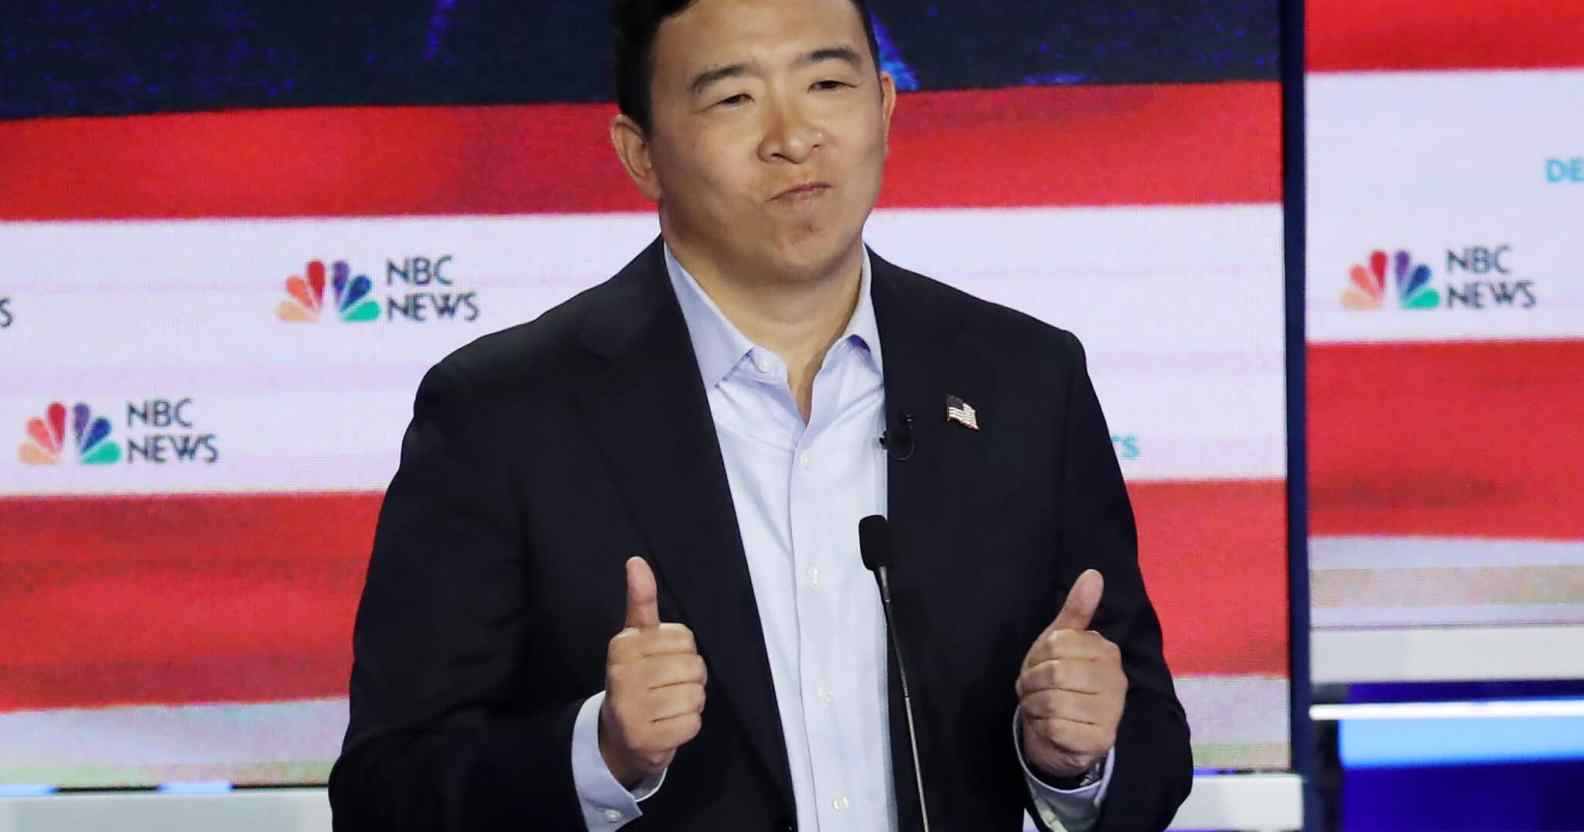 New York mayoral candidate Andrew Yang